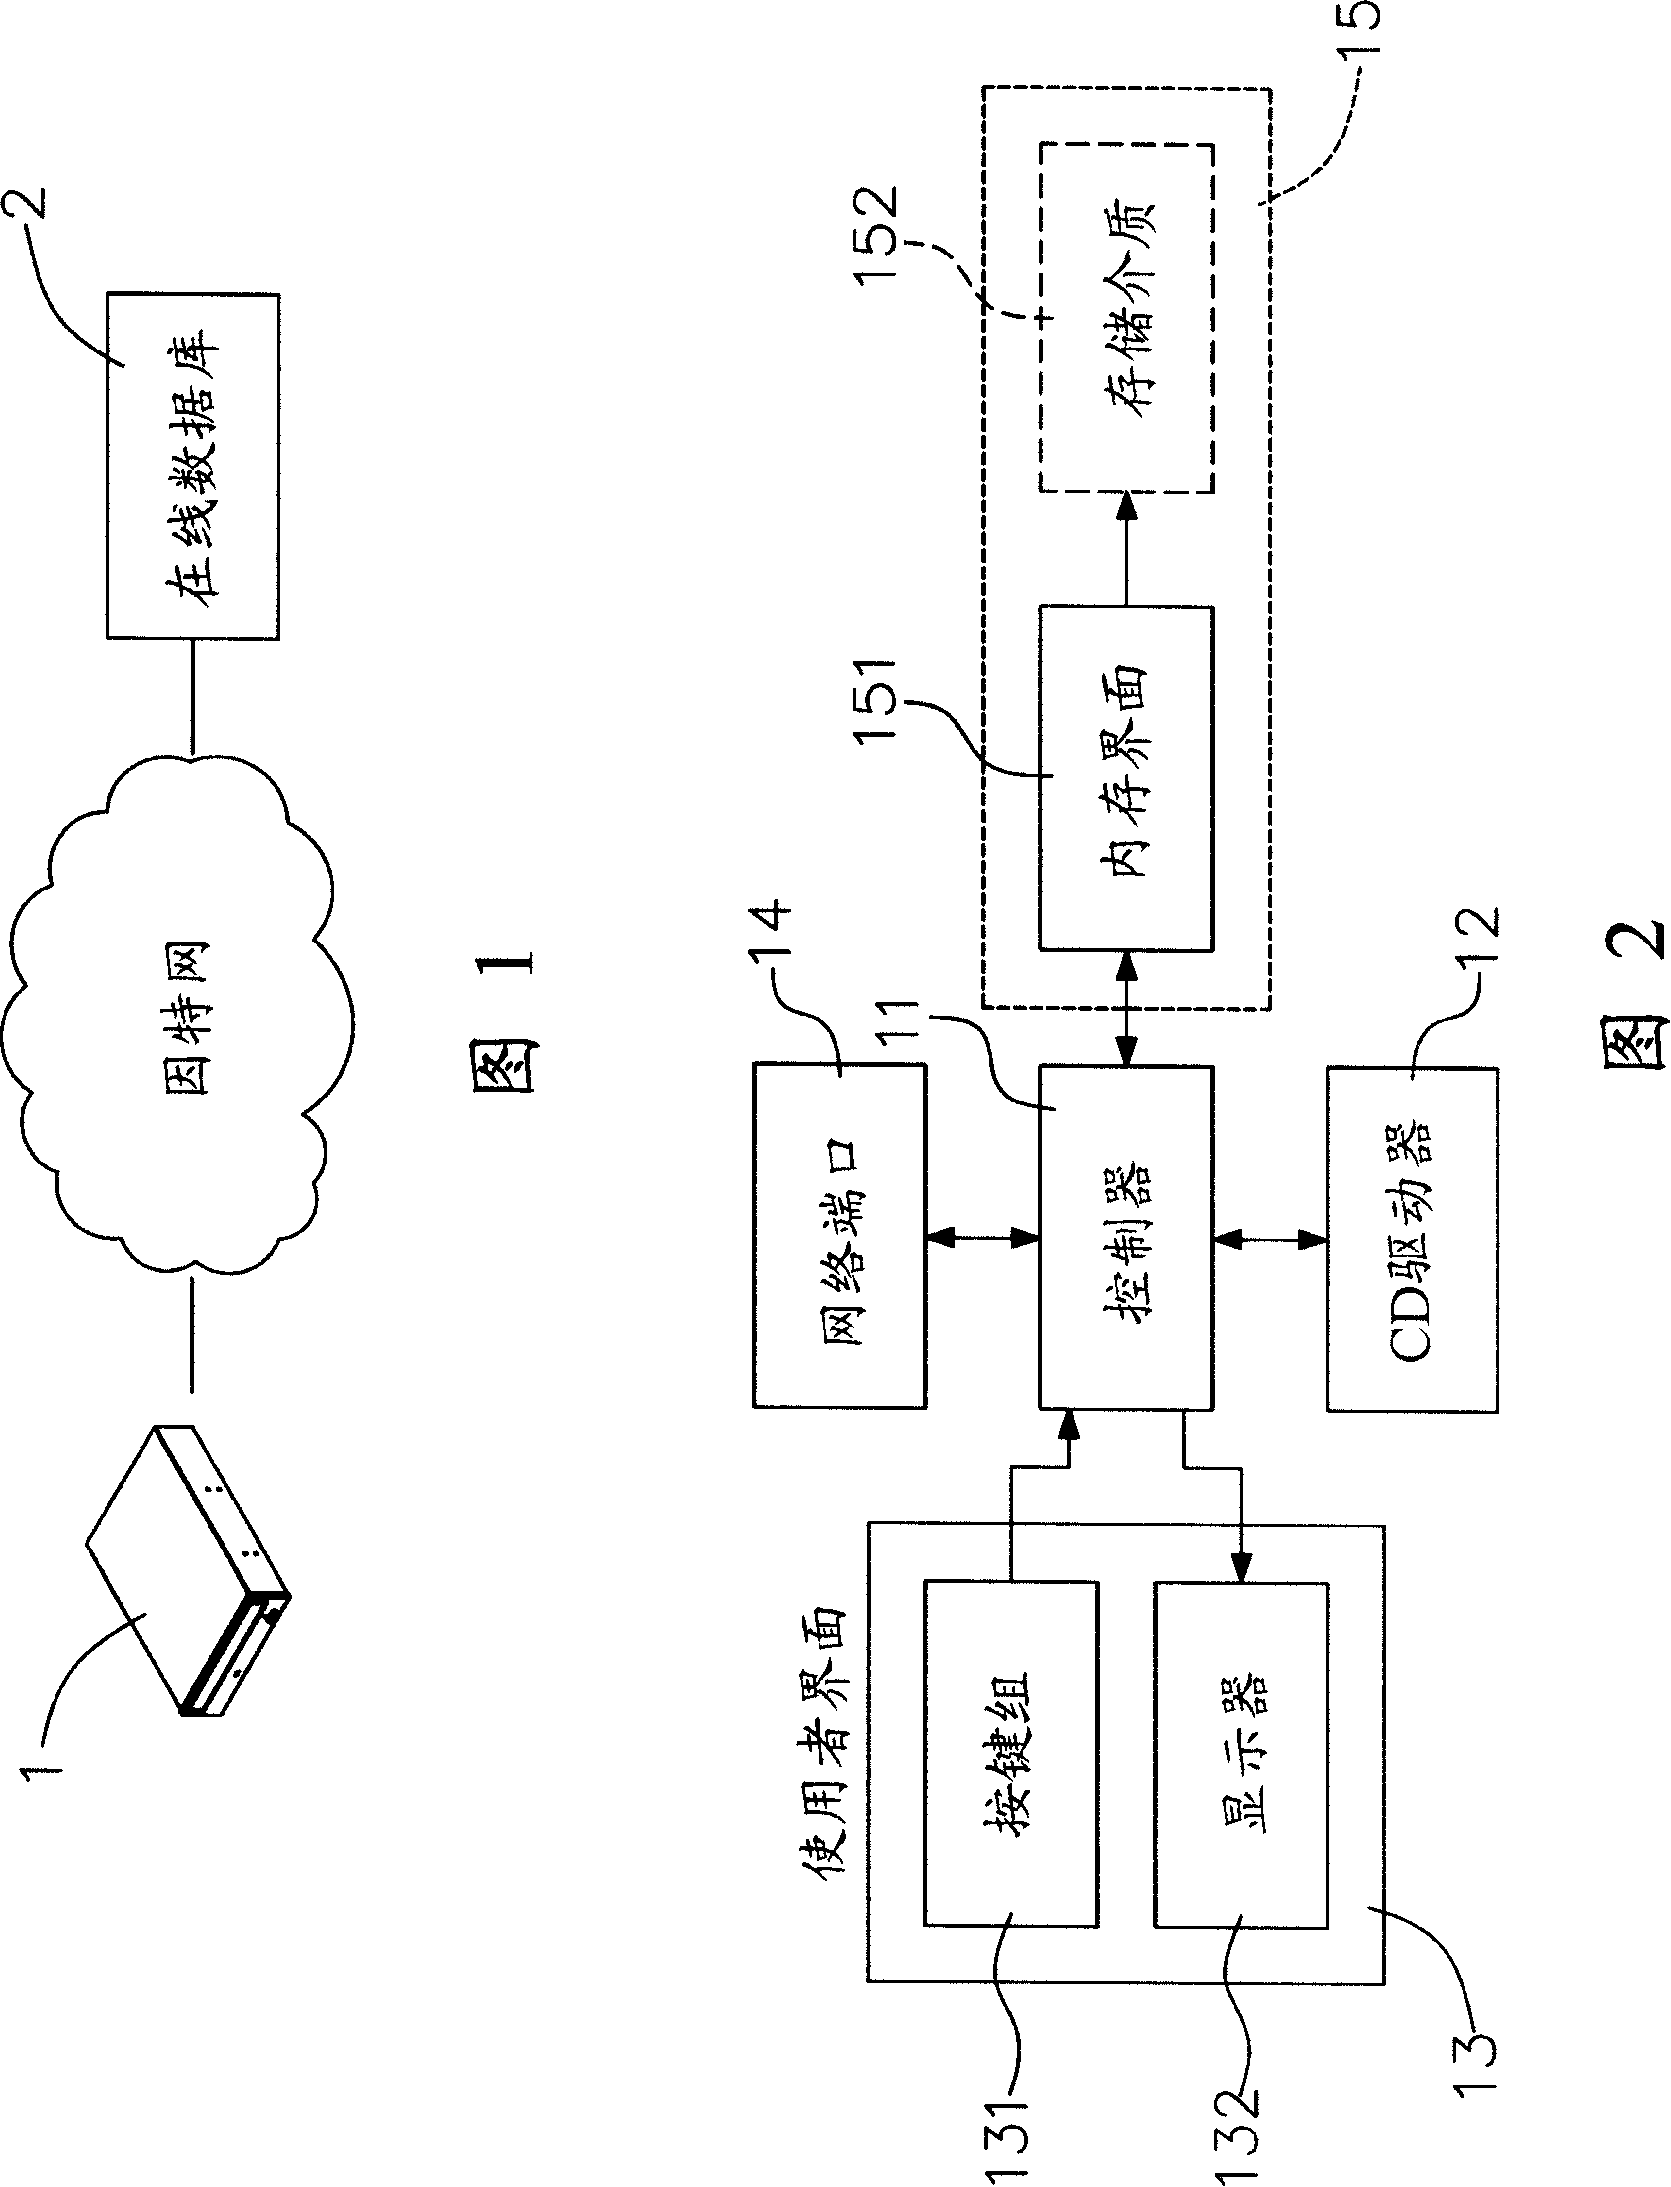 CD player capable of converting into digital compressed files and adding auxiliary information